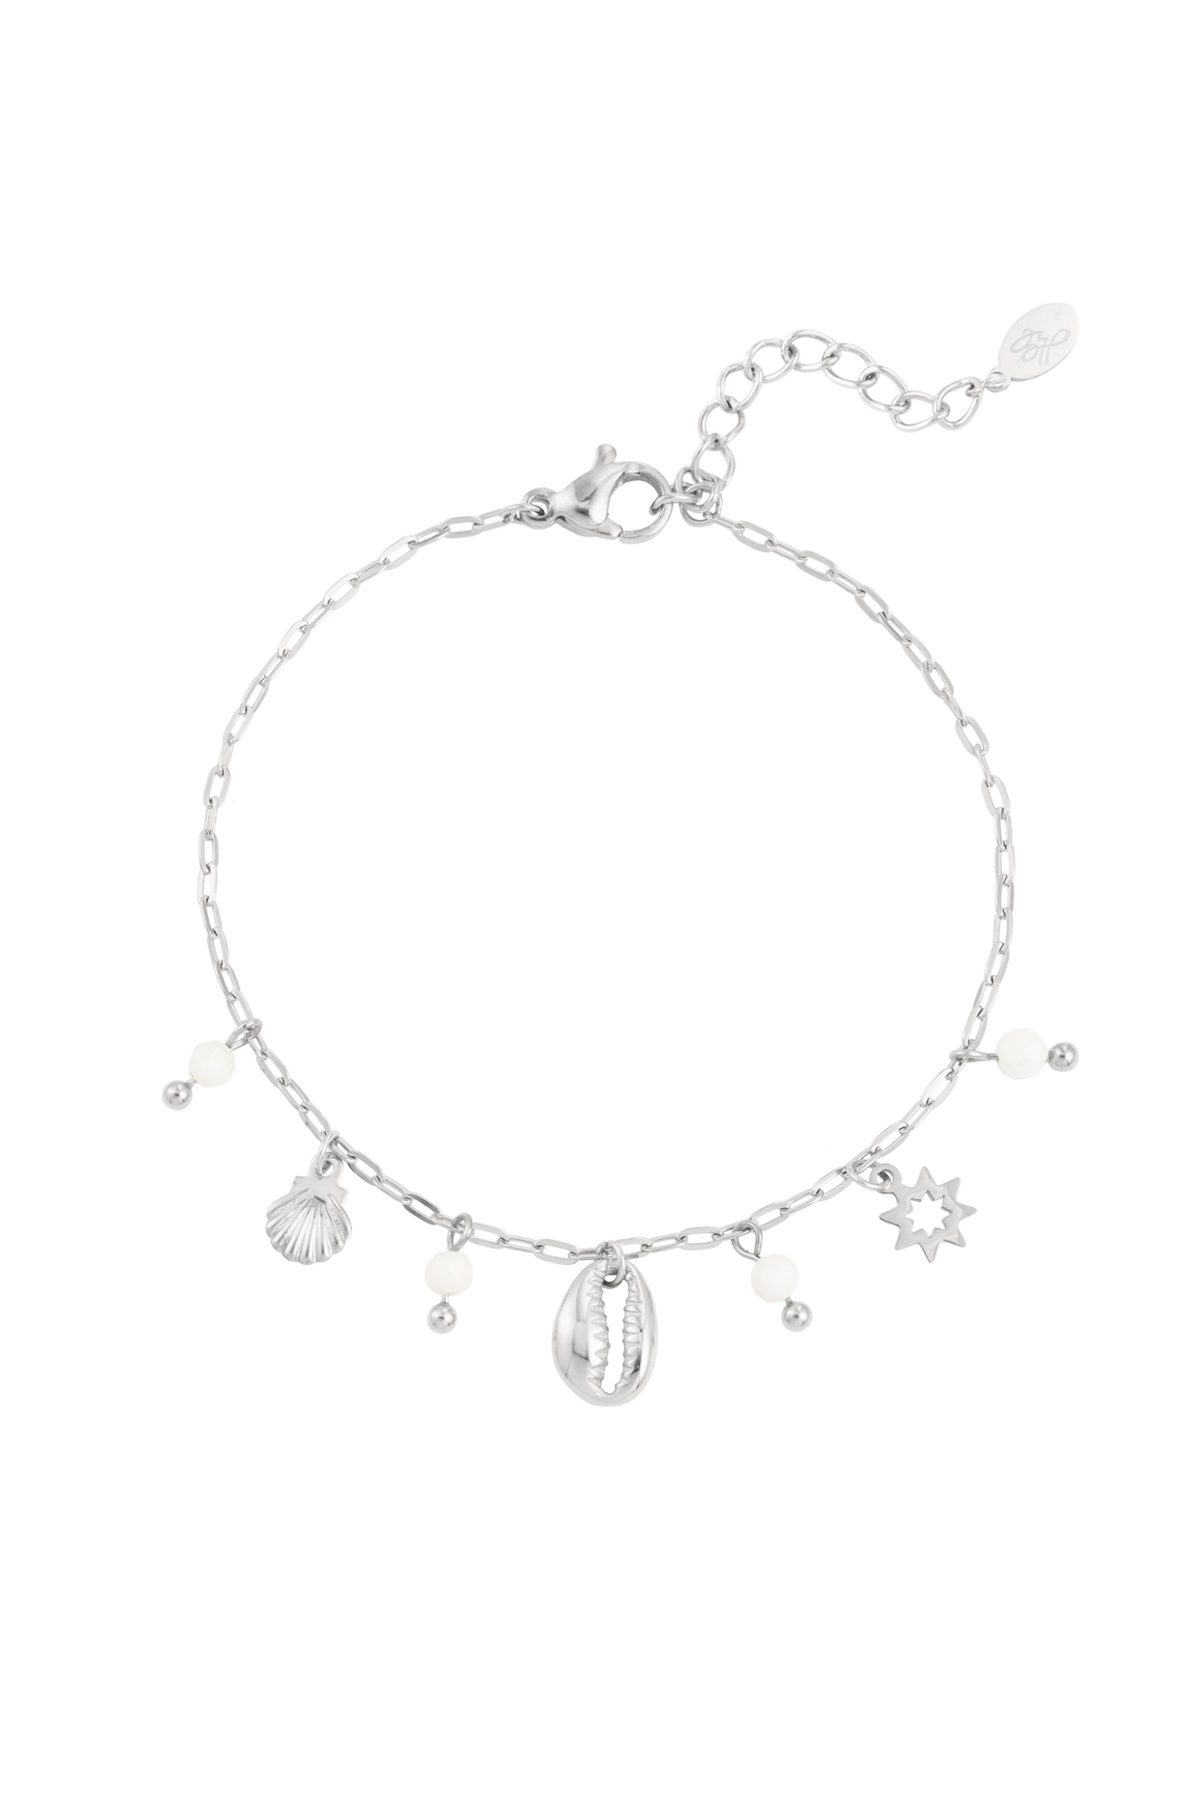 Bracelet charms and stones - silver h5 